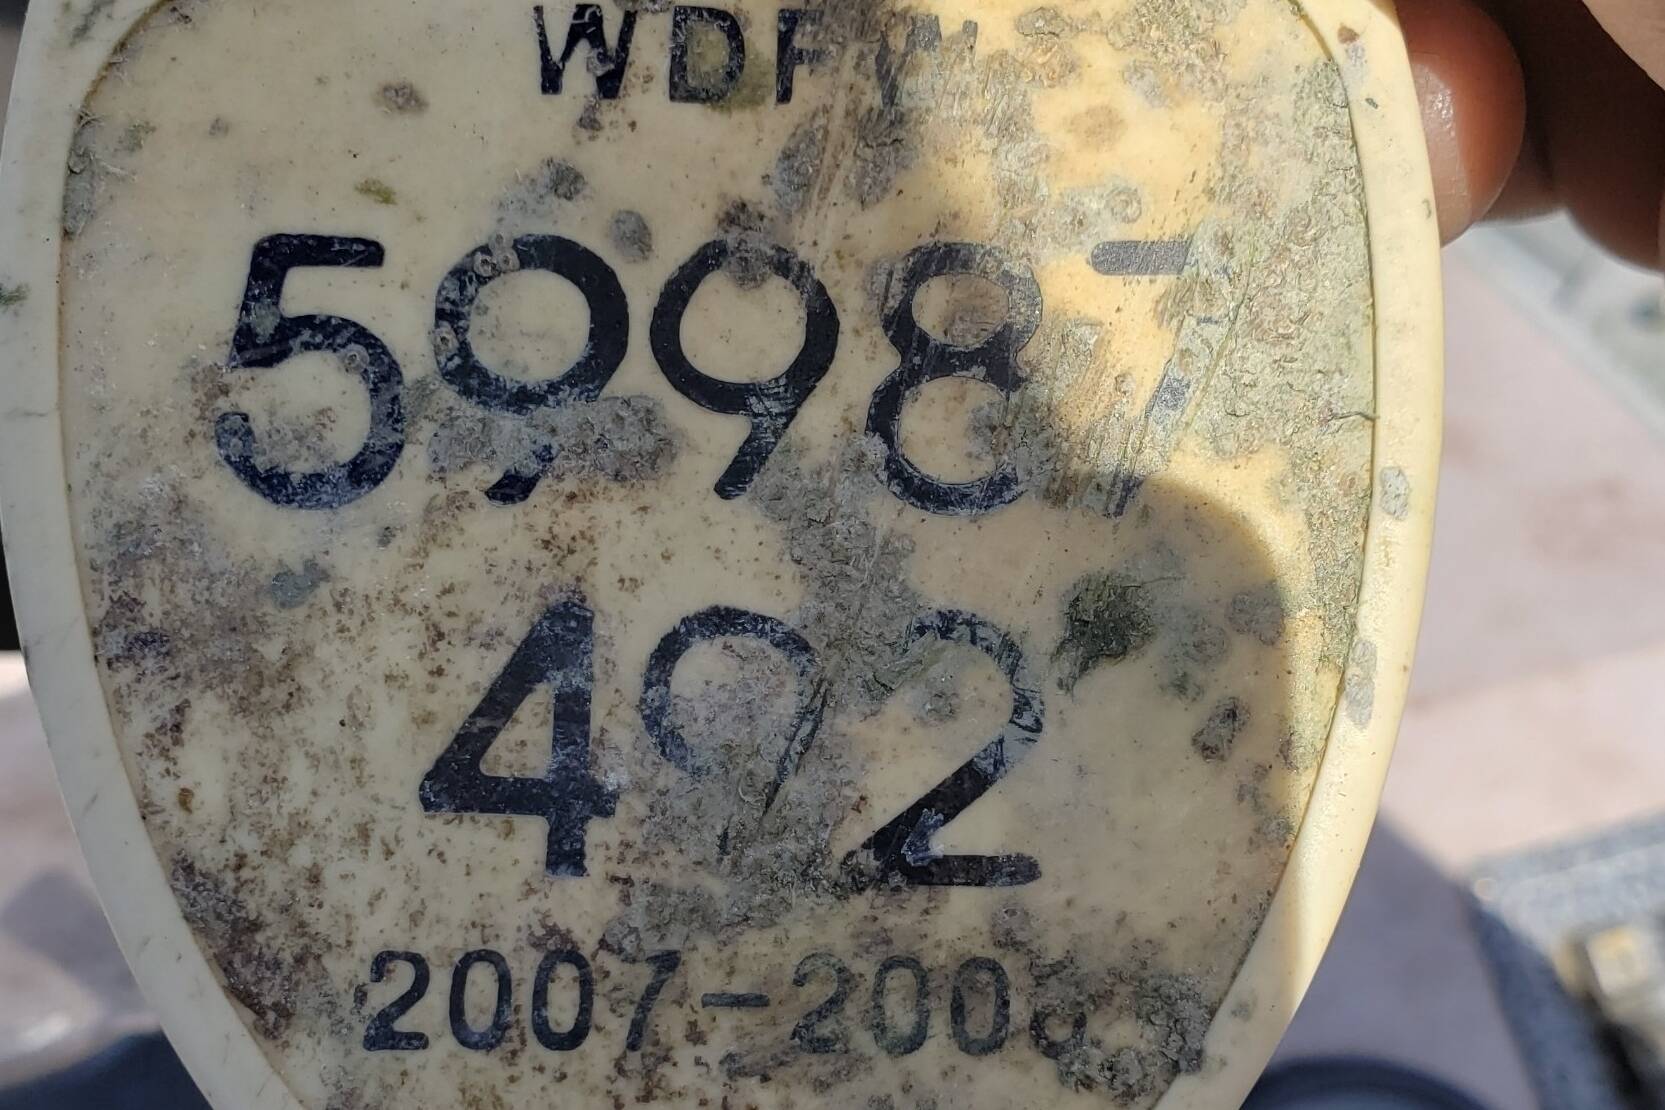 A remaining tag left from the broken crab pot the gray whale was trapped in shows a date from 2007 to 2008. (Courtesy Photo)